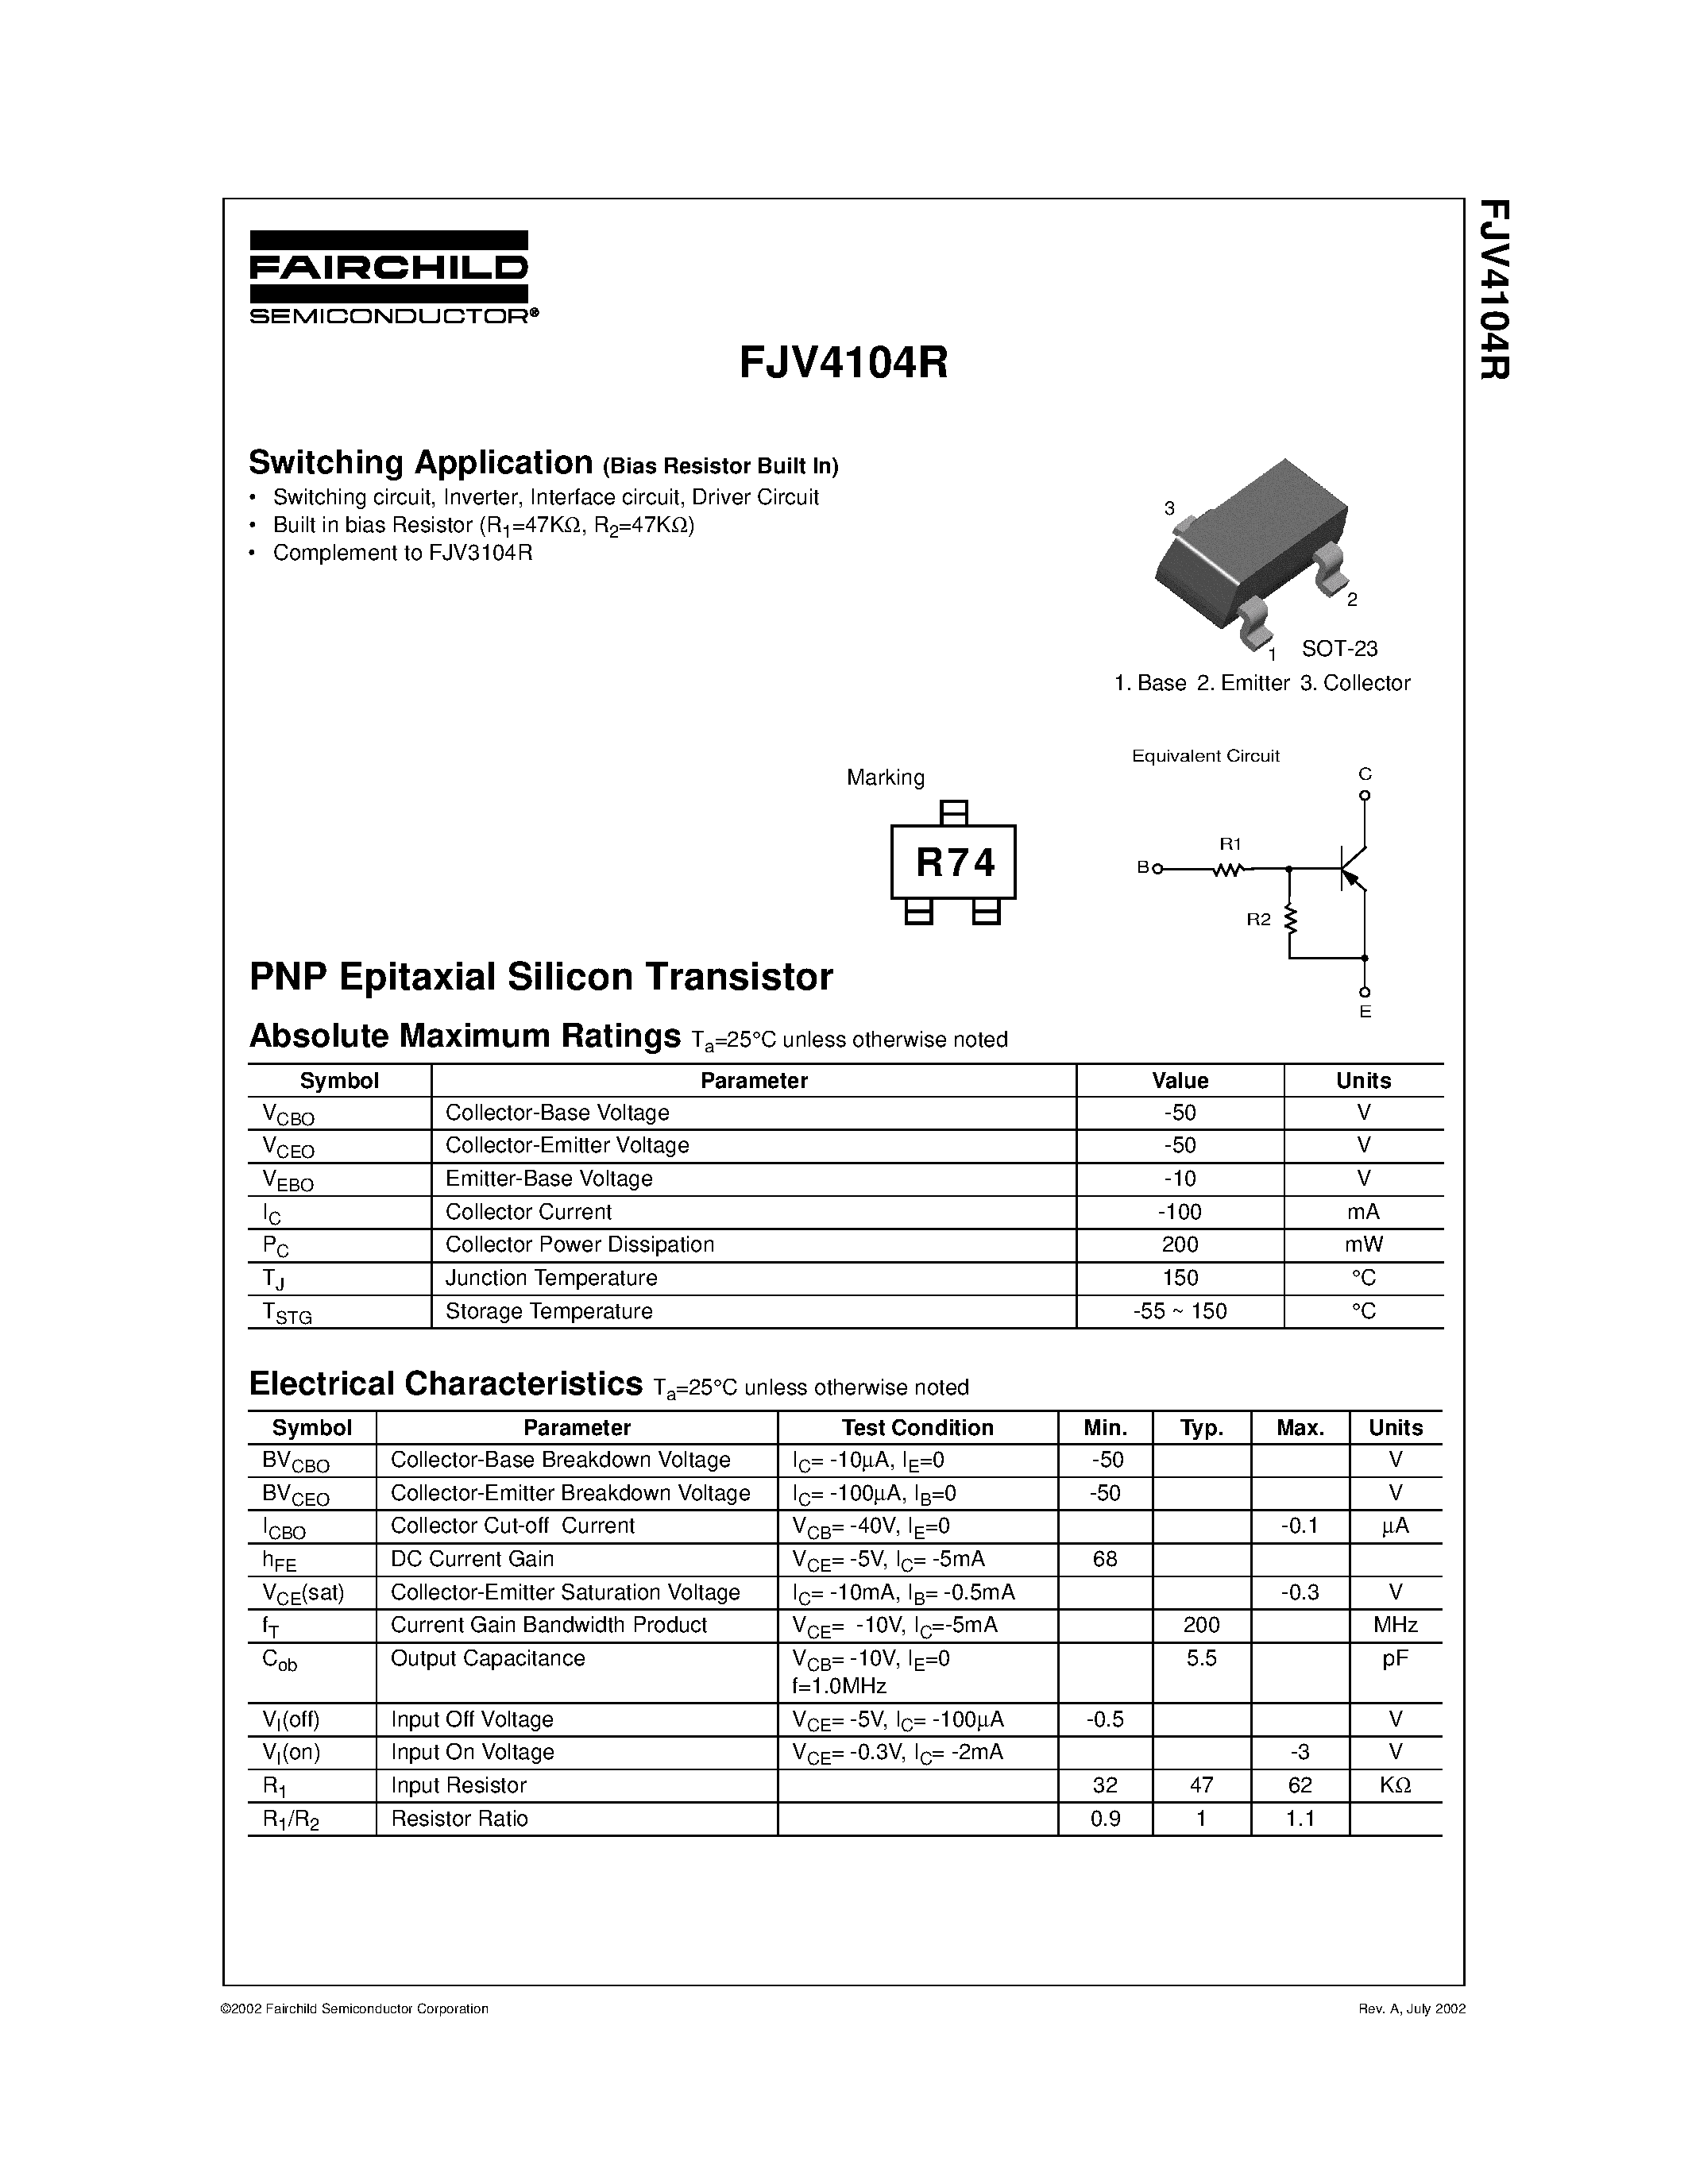 Datasheet FJV4104 - PNP Epitaxial Silicon Transistor page 1